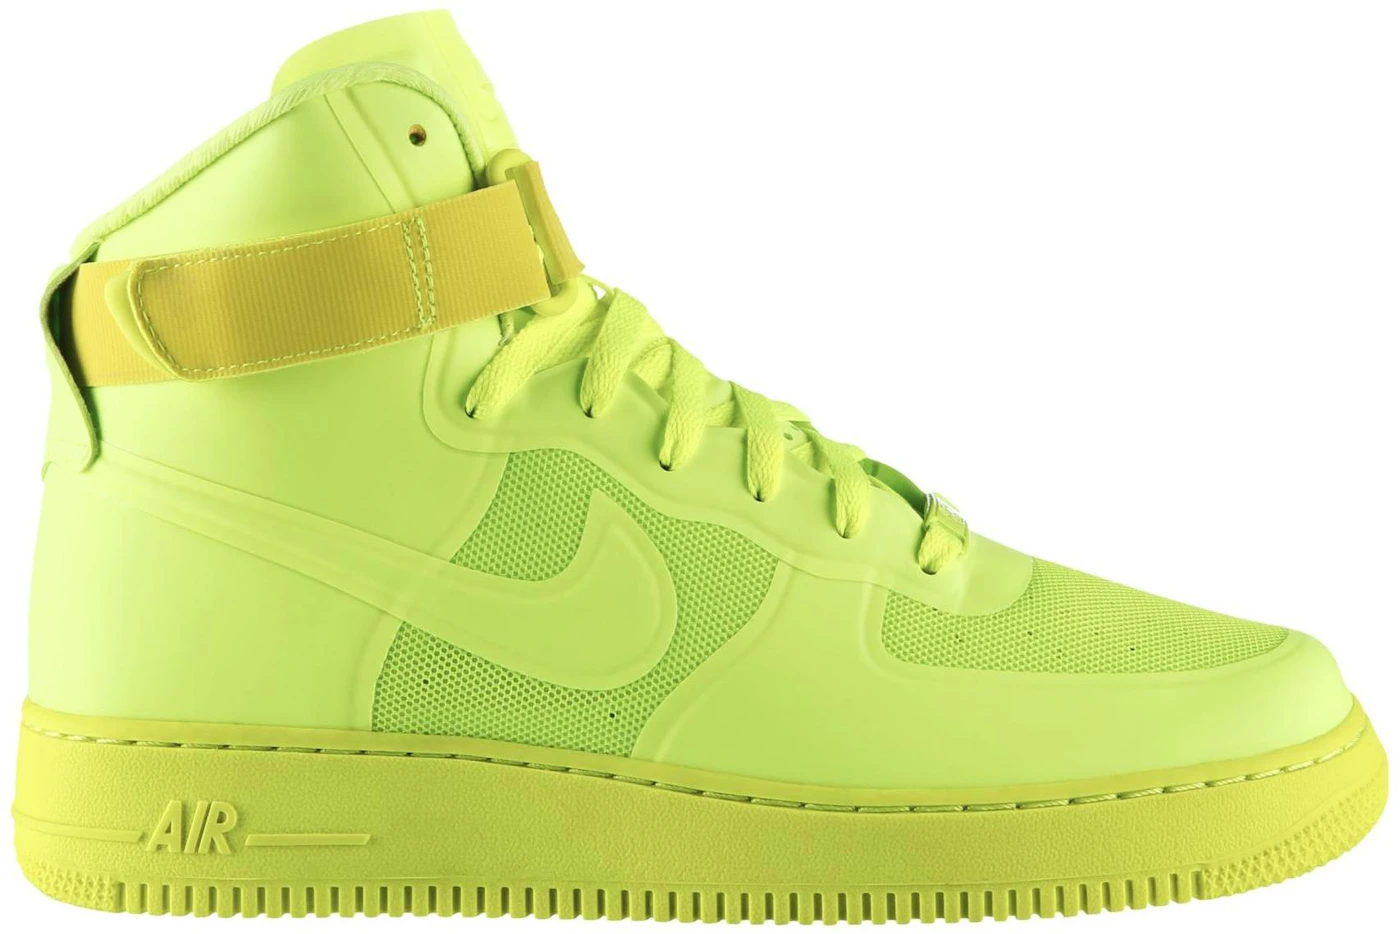 Nike Air Force 1 Hyperfuse Volt Men's - 454433-700 - US